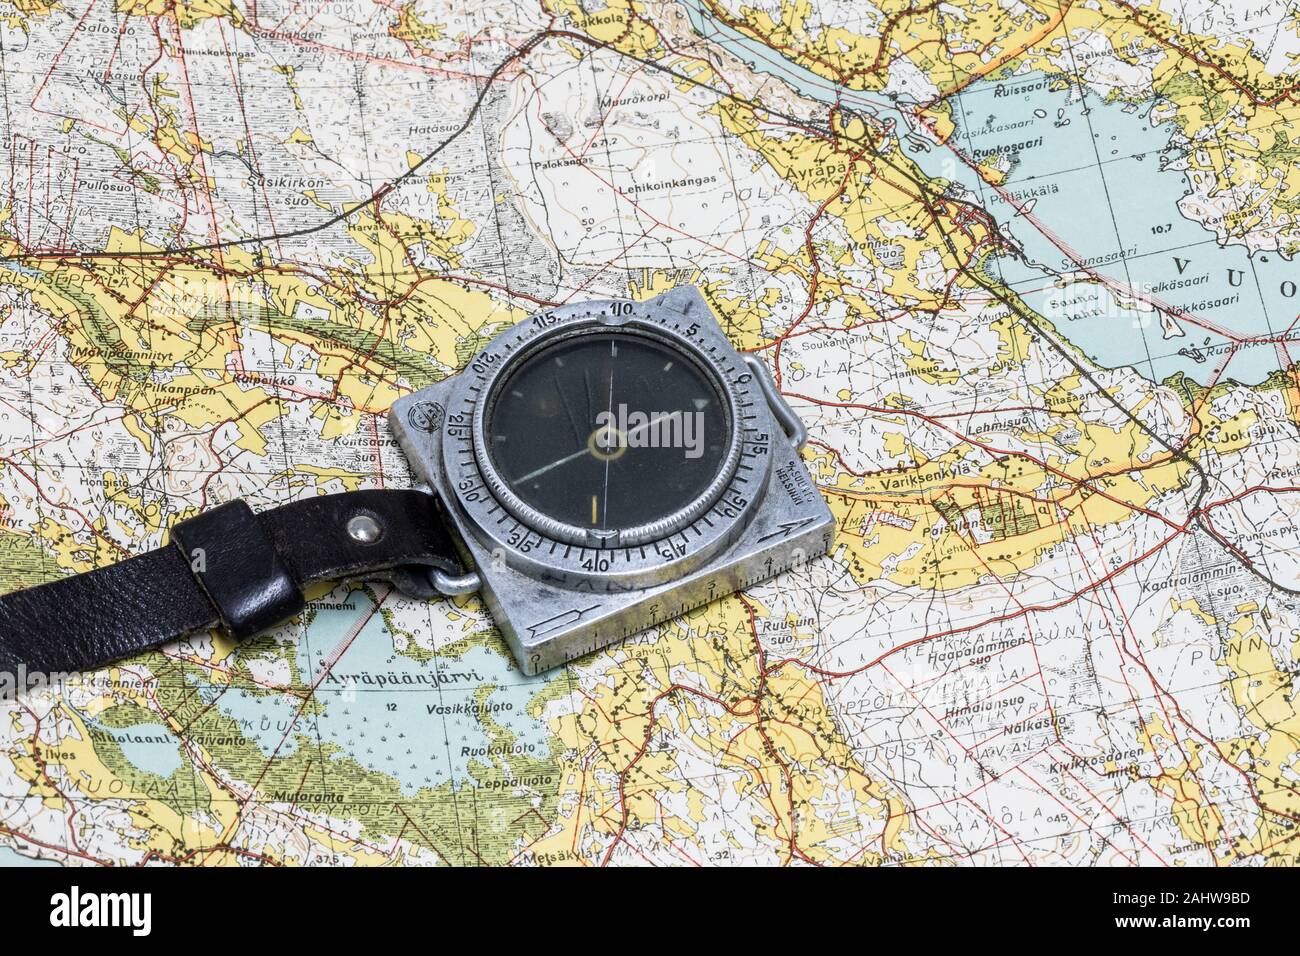 Finnish WW2 era military march compass Suunto, placed on a map of Karelian Isthmus. Stock Photo